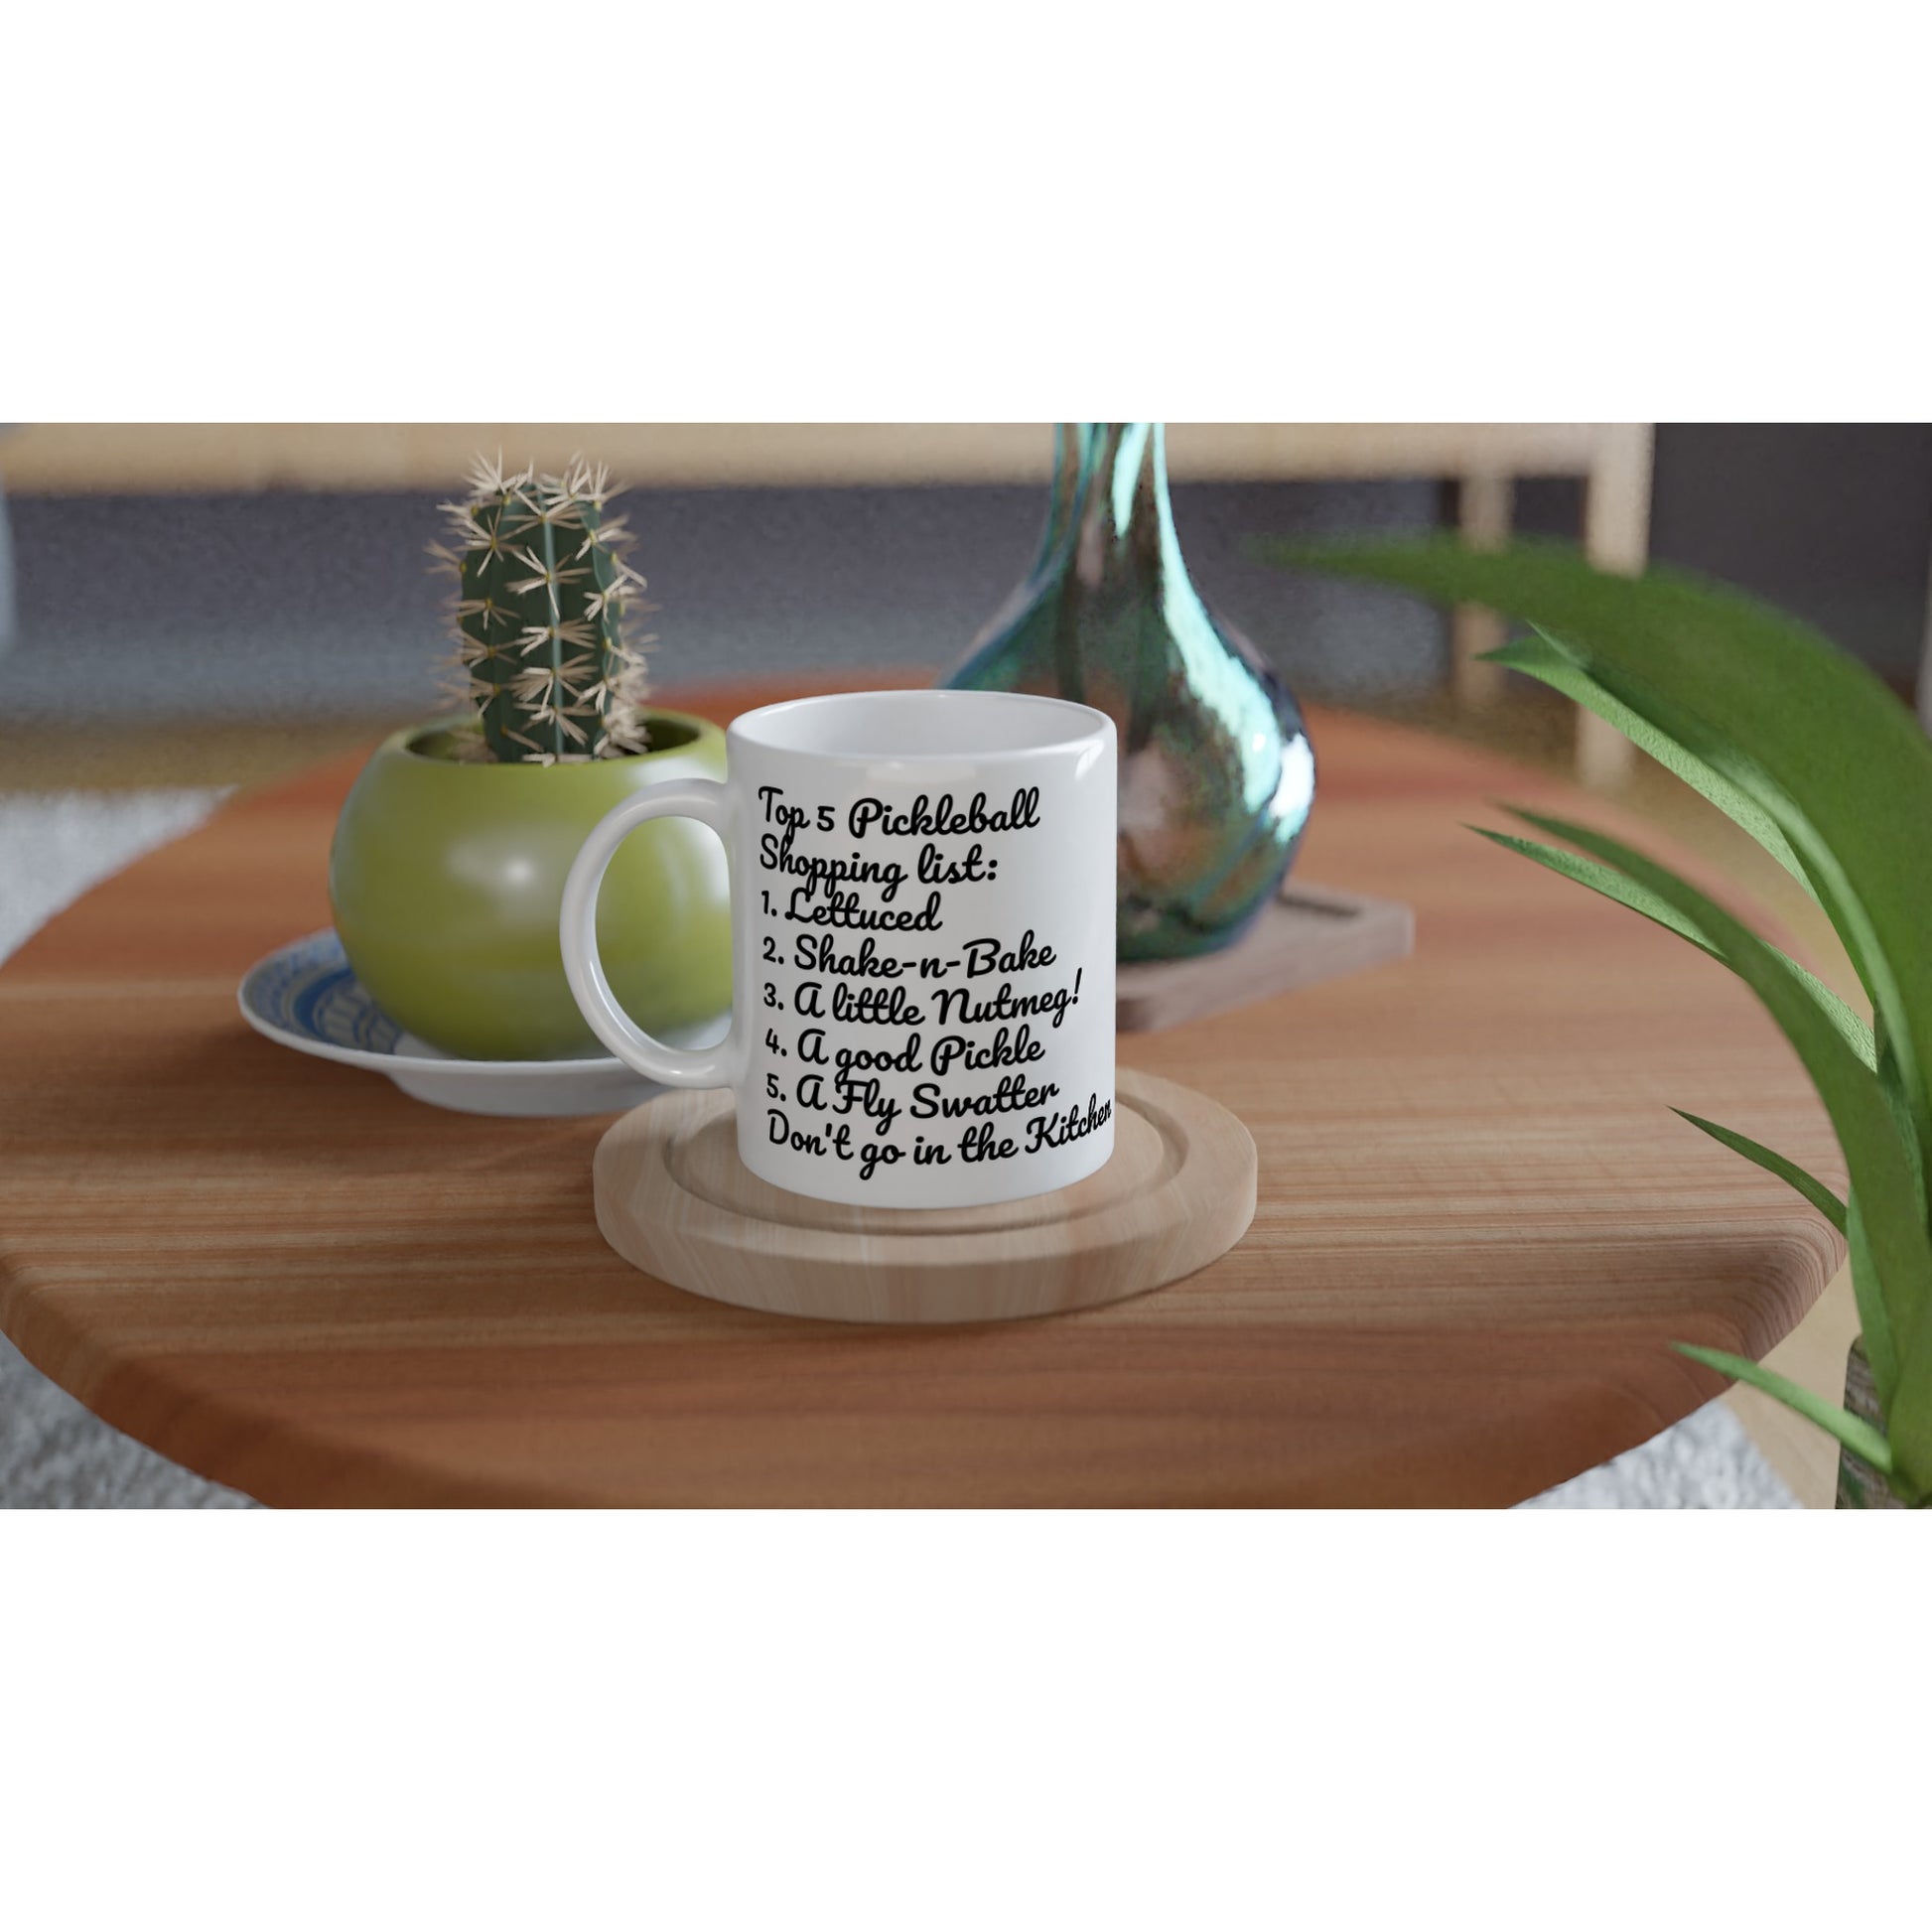 White ceramic 11oz mug with original motto Top 5 Pickleball Shopping list lettuce, Shake-n-bake, Nutmeg, Pickle, a Fly Swatter Don’t go in the kitchen front side and Let's Play Pickleball logo on back coffee mug dishwasher and microwave safe from WhatYa Say Apparel sitting on coaster on coffee table with green potted cactus and silver vase.